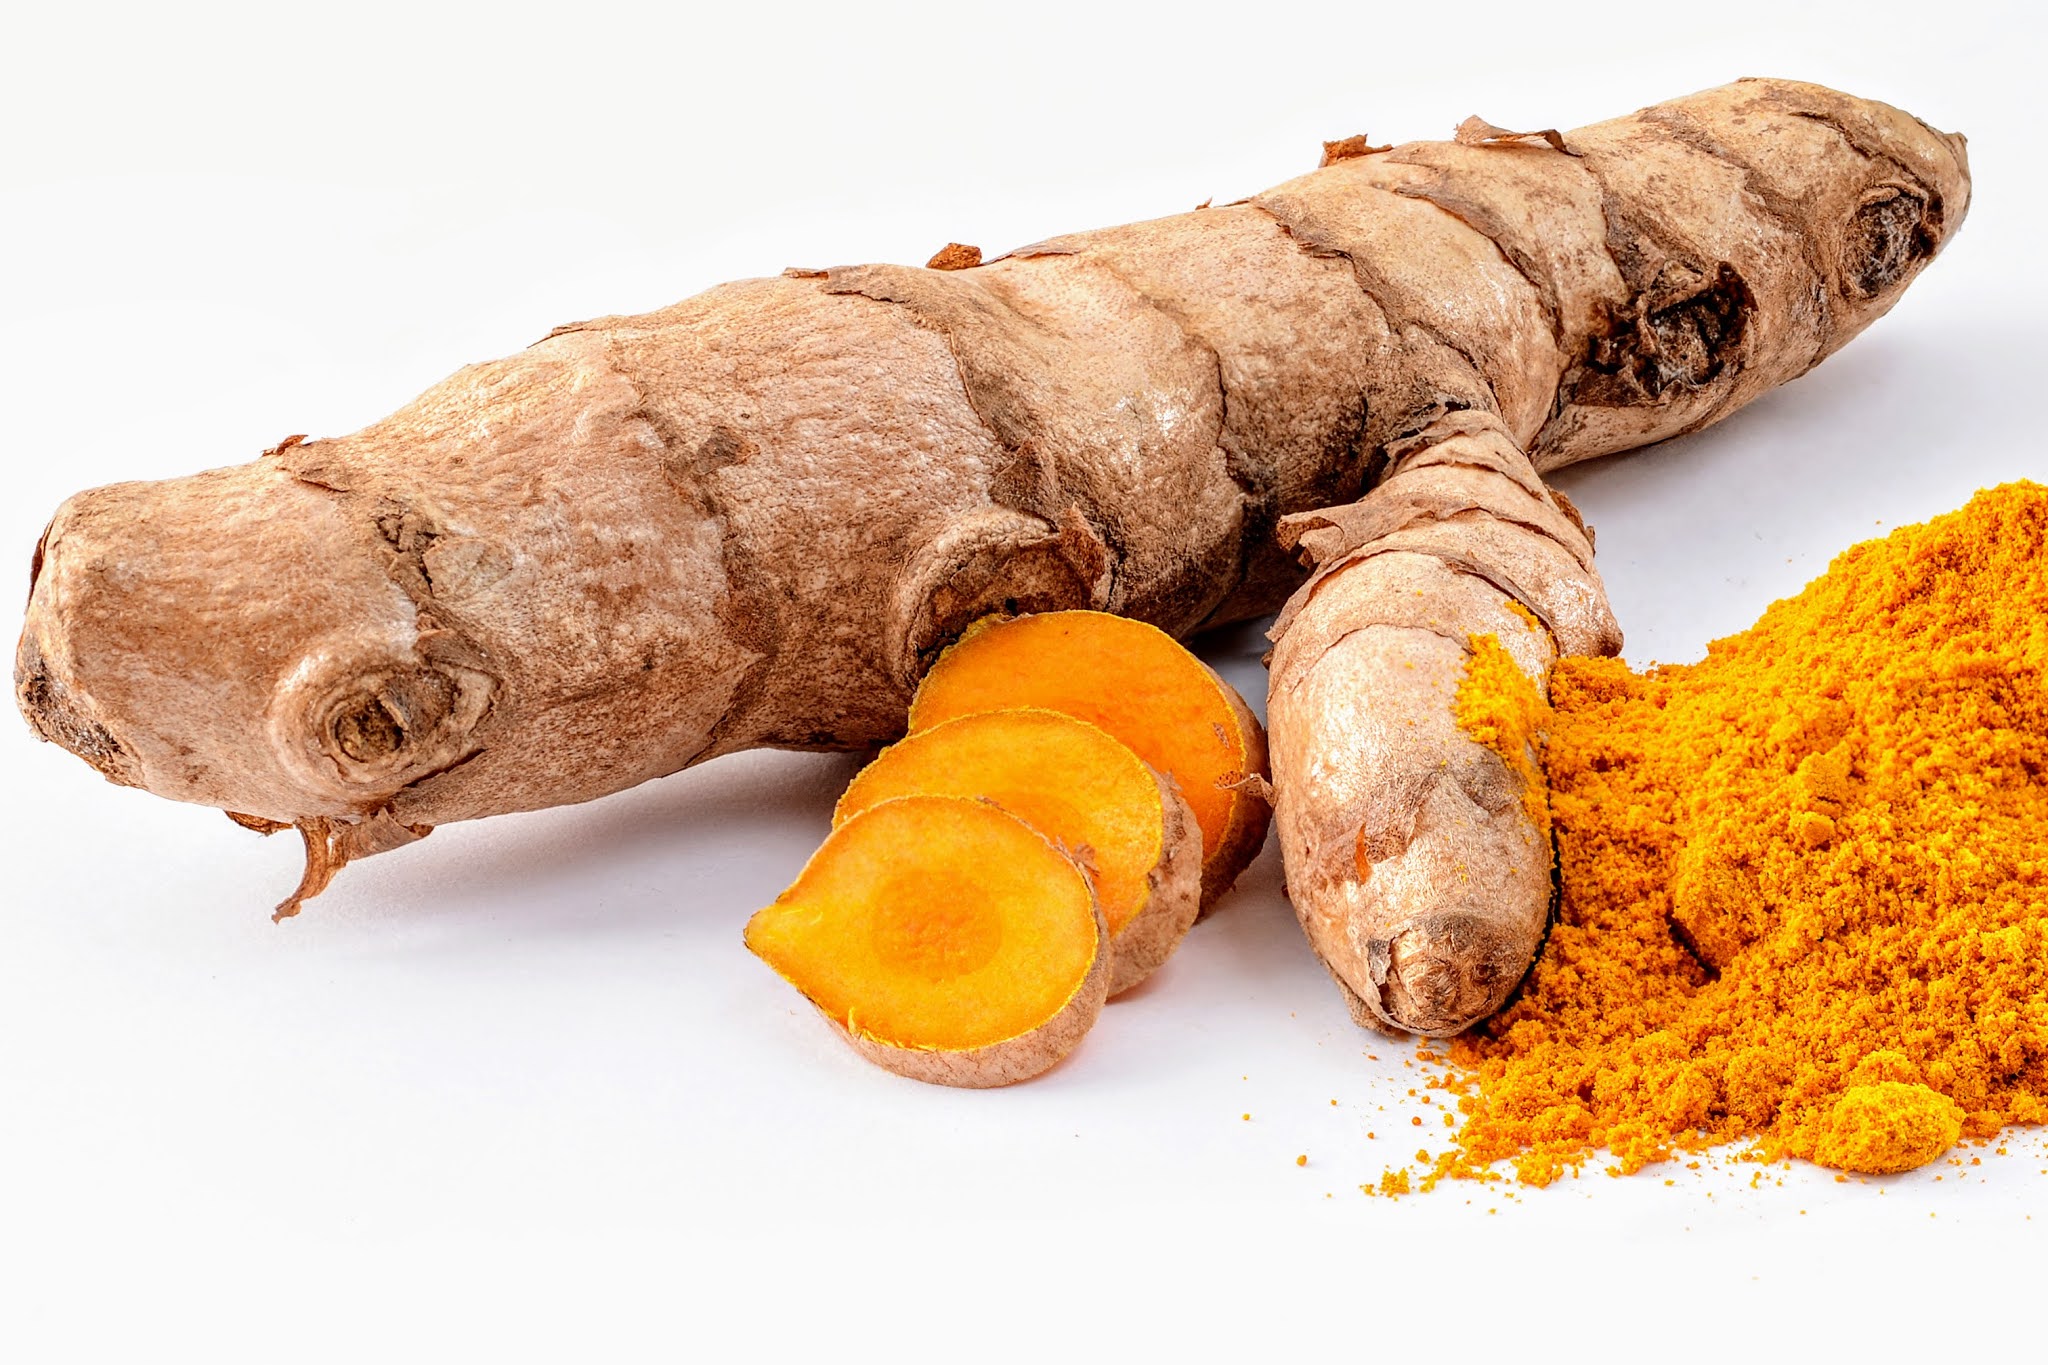 History Of Kunyit Turmeric In Singapore Malaysia Indonesia Cuisine The Golden Spice Johor Kaki Travels For Food